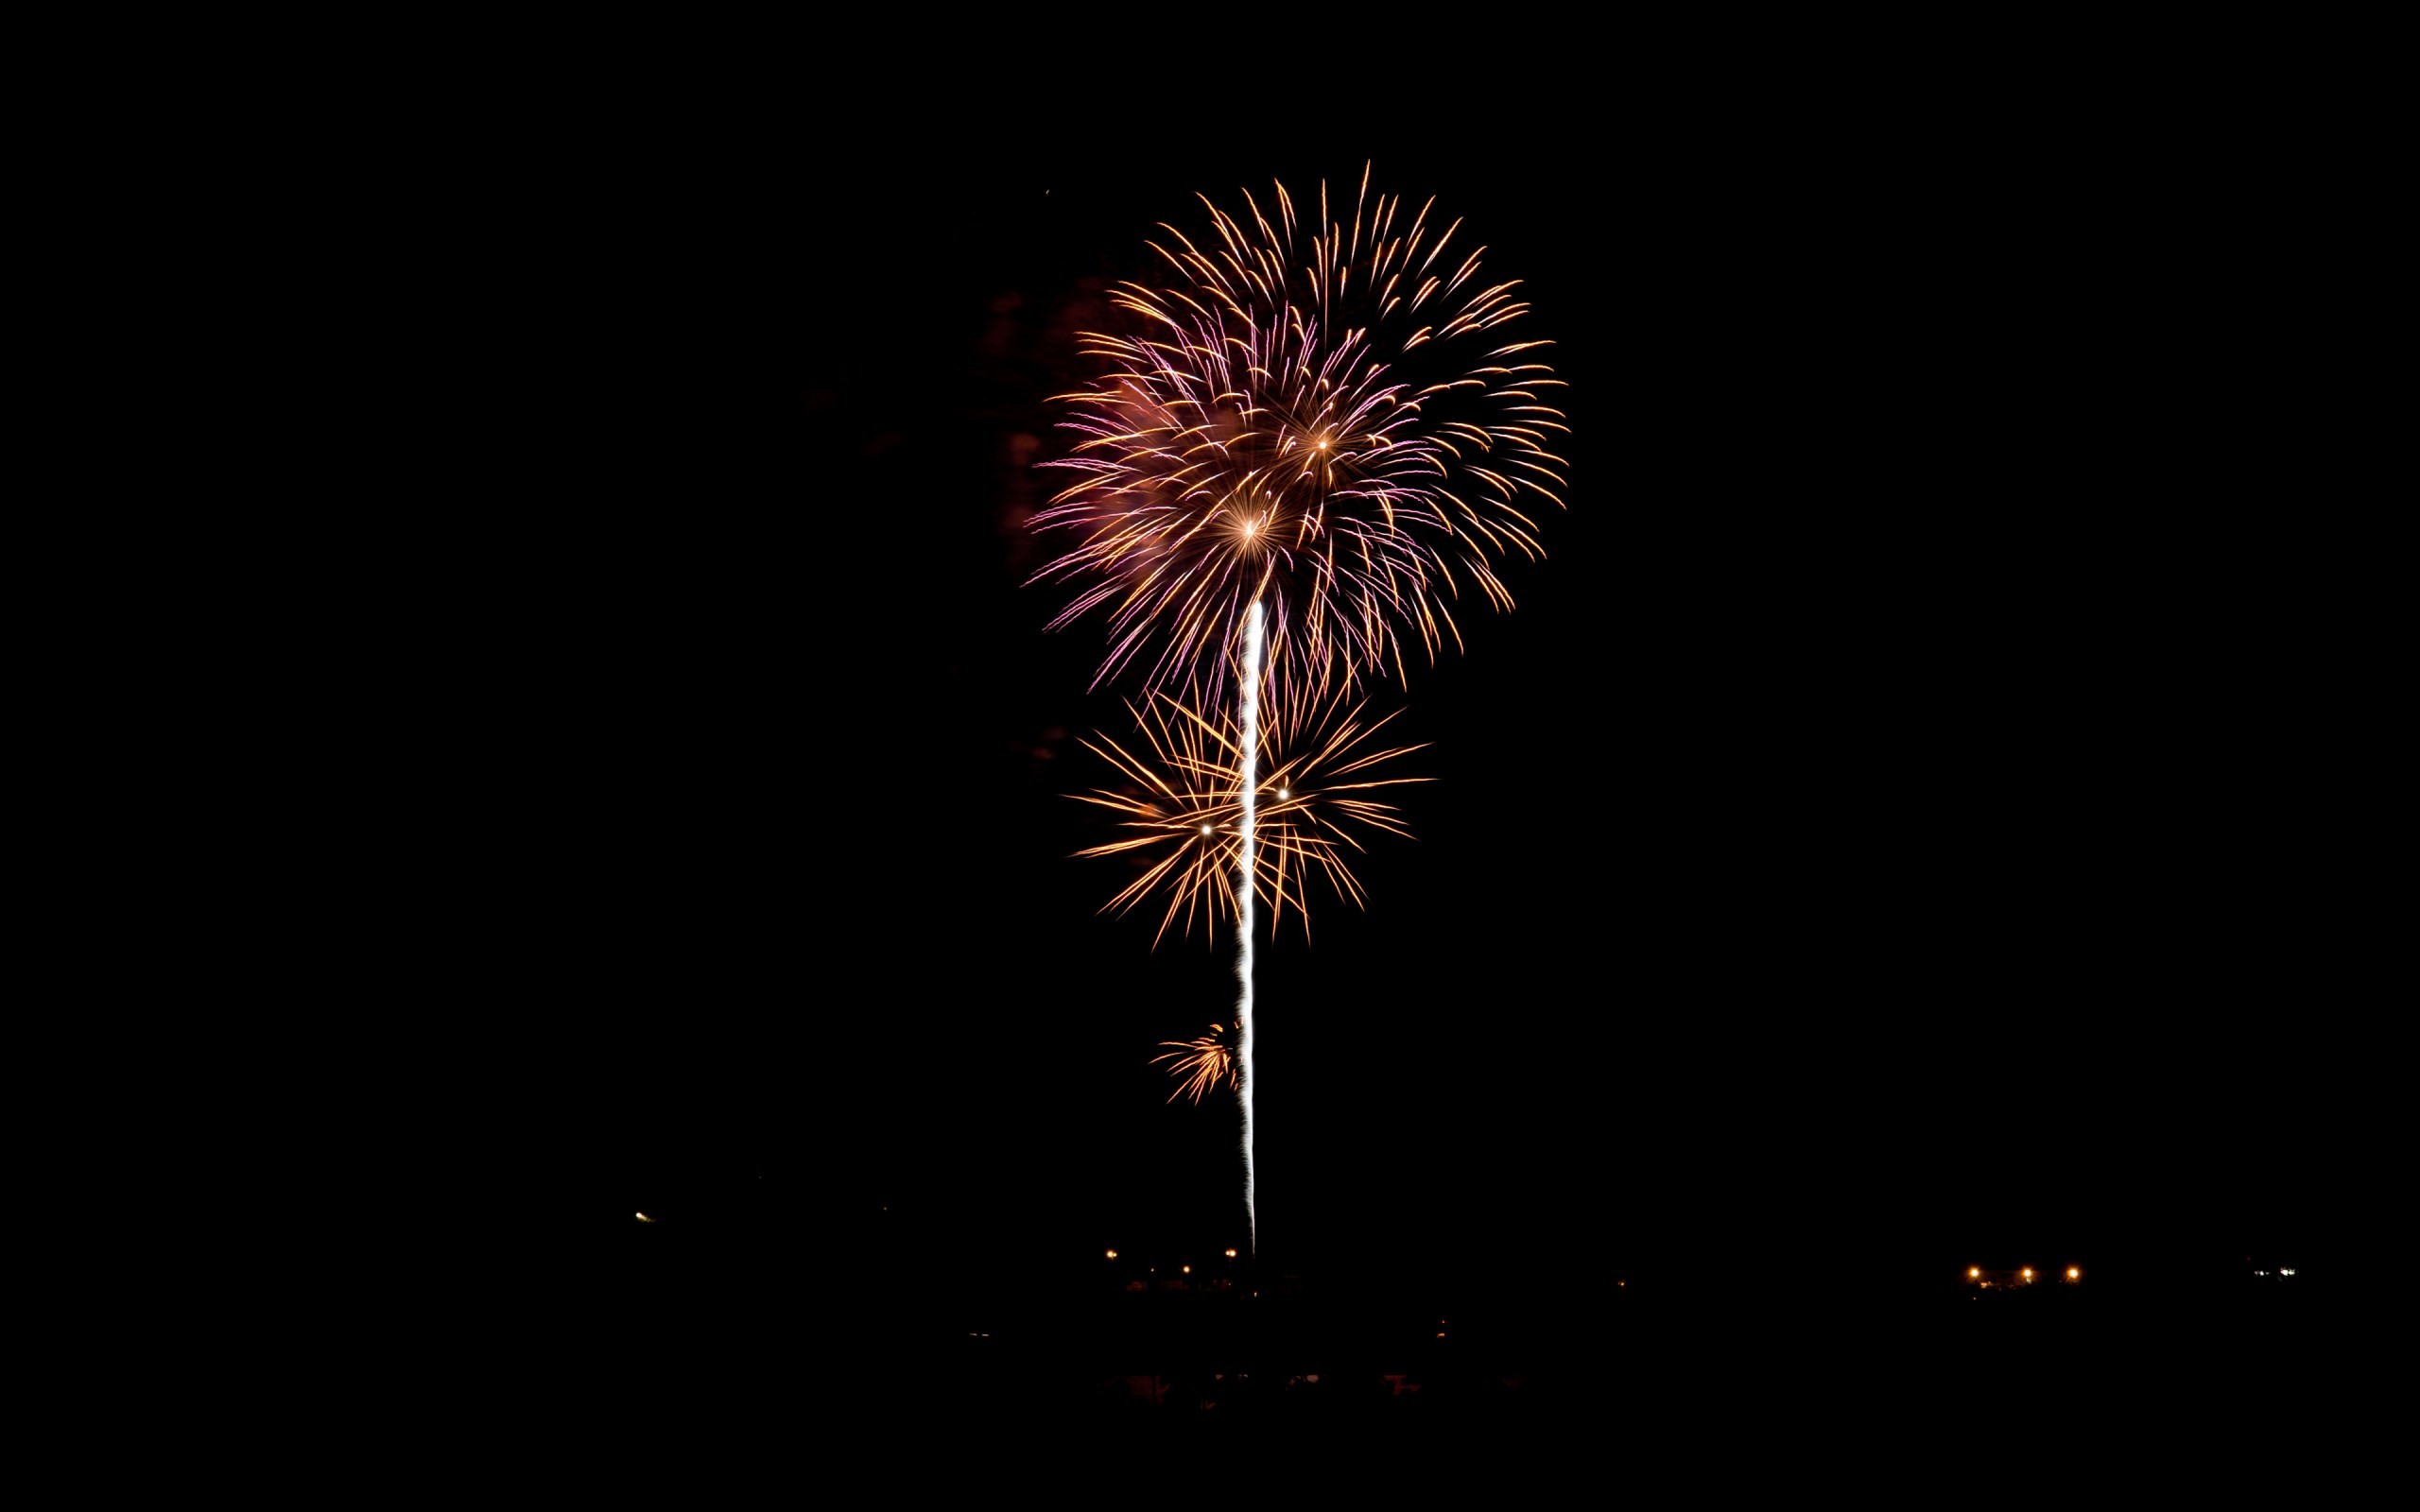 2560x1600 #1612700, fireworks category - free wallpaper and screensavers for fireworks